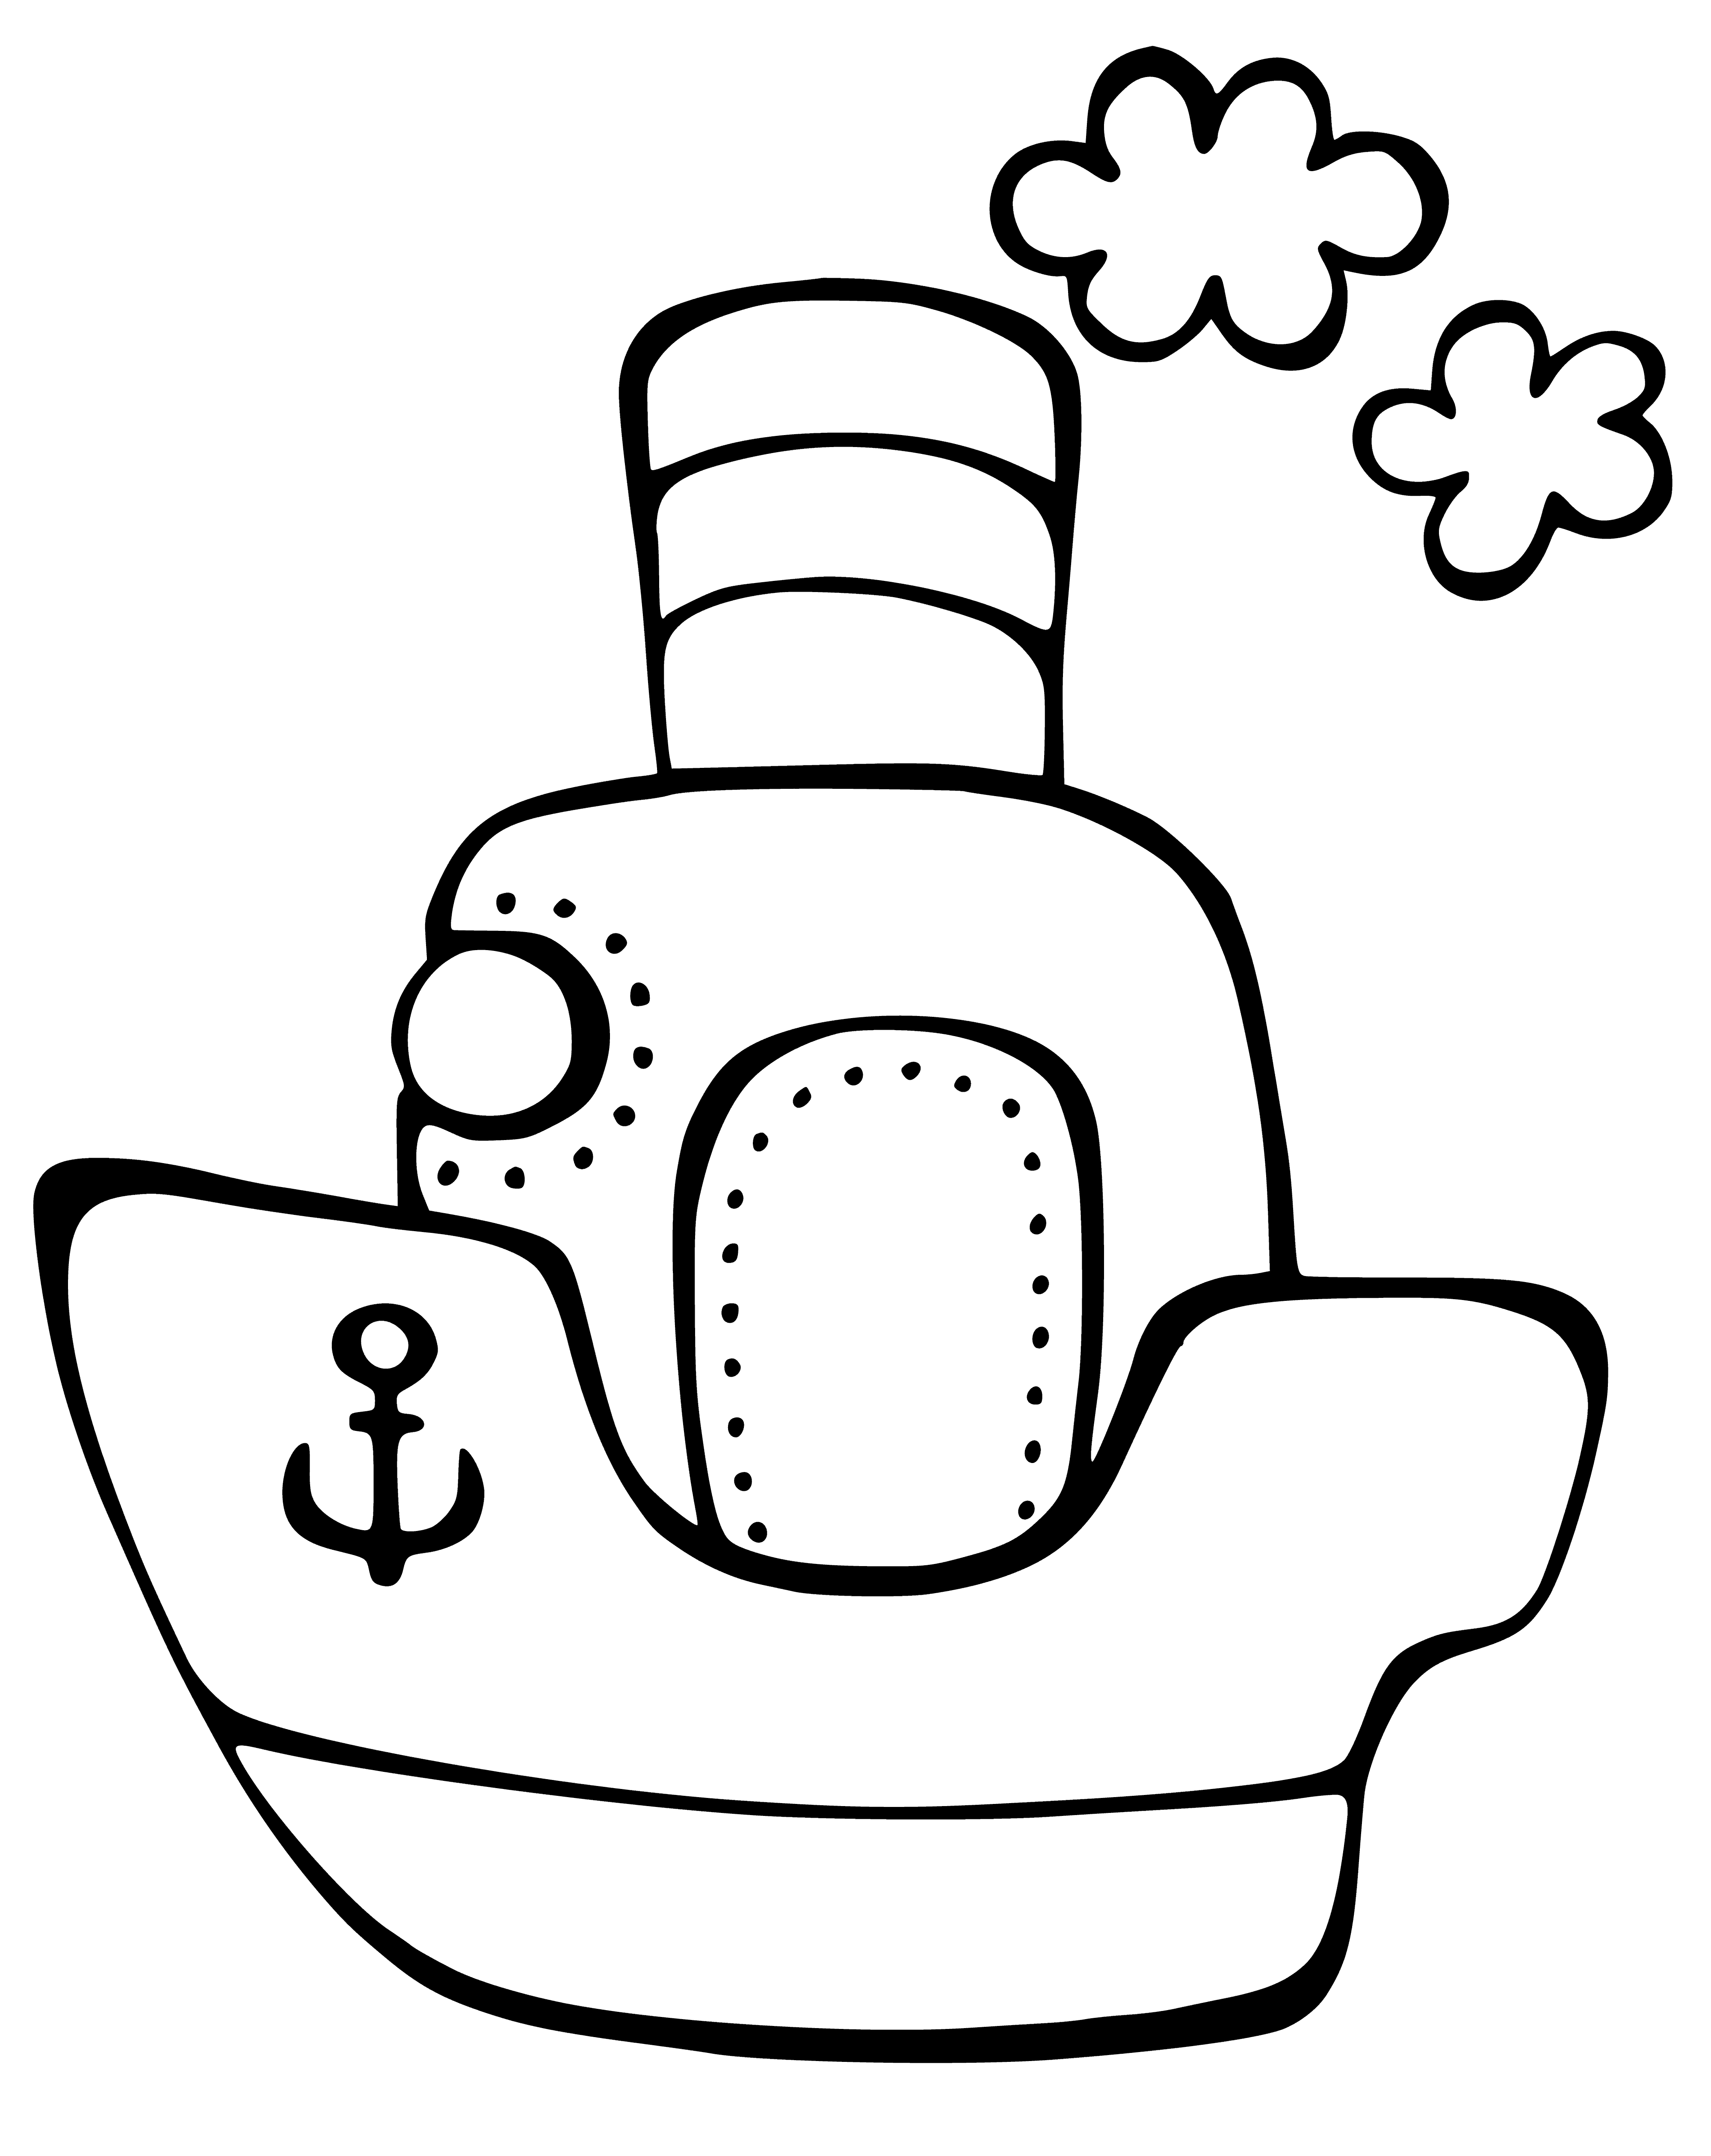 coloring page: A large steamship covered in windows and flags, with a large wheel at the front, floating on small waves. #coloringpages